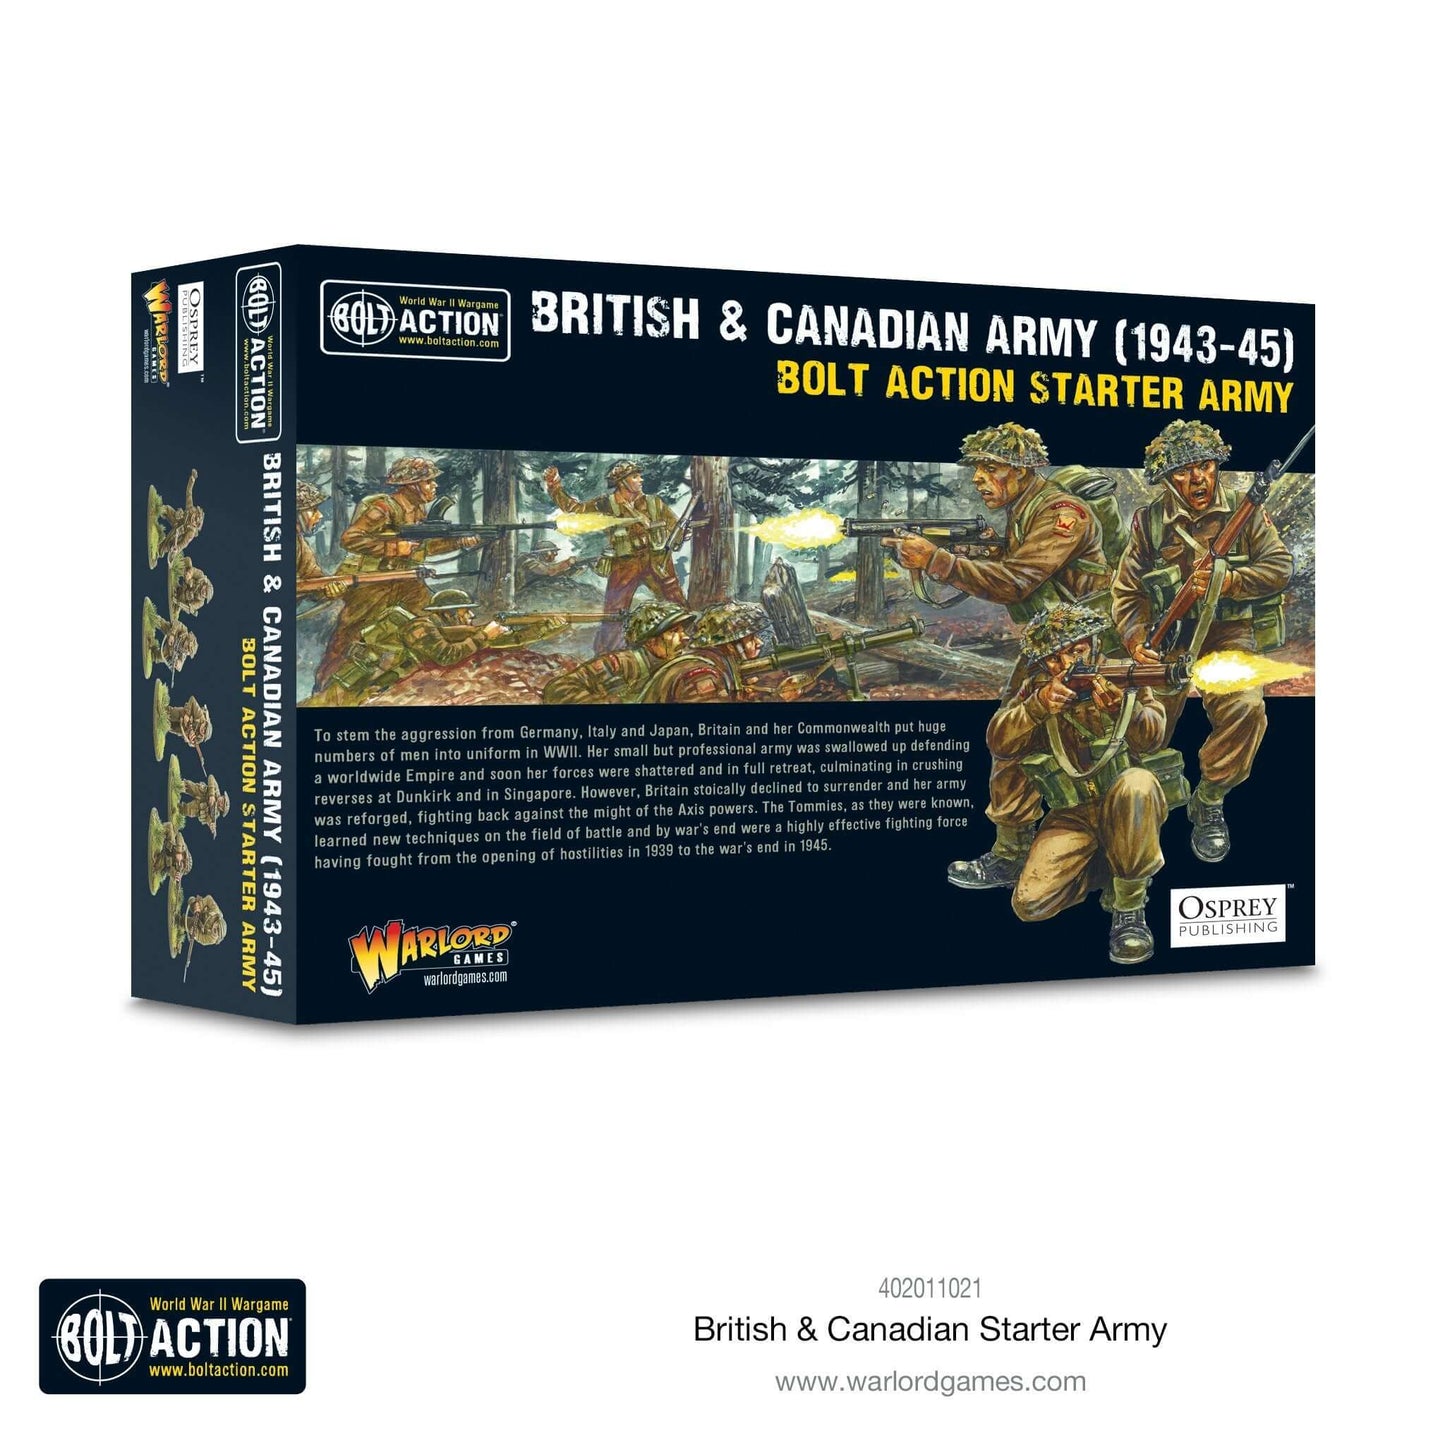 British & Canadian Army (1943-45) Starter Army Bolt Action WARLORD